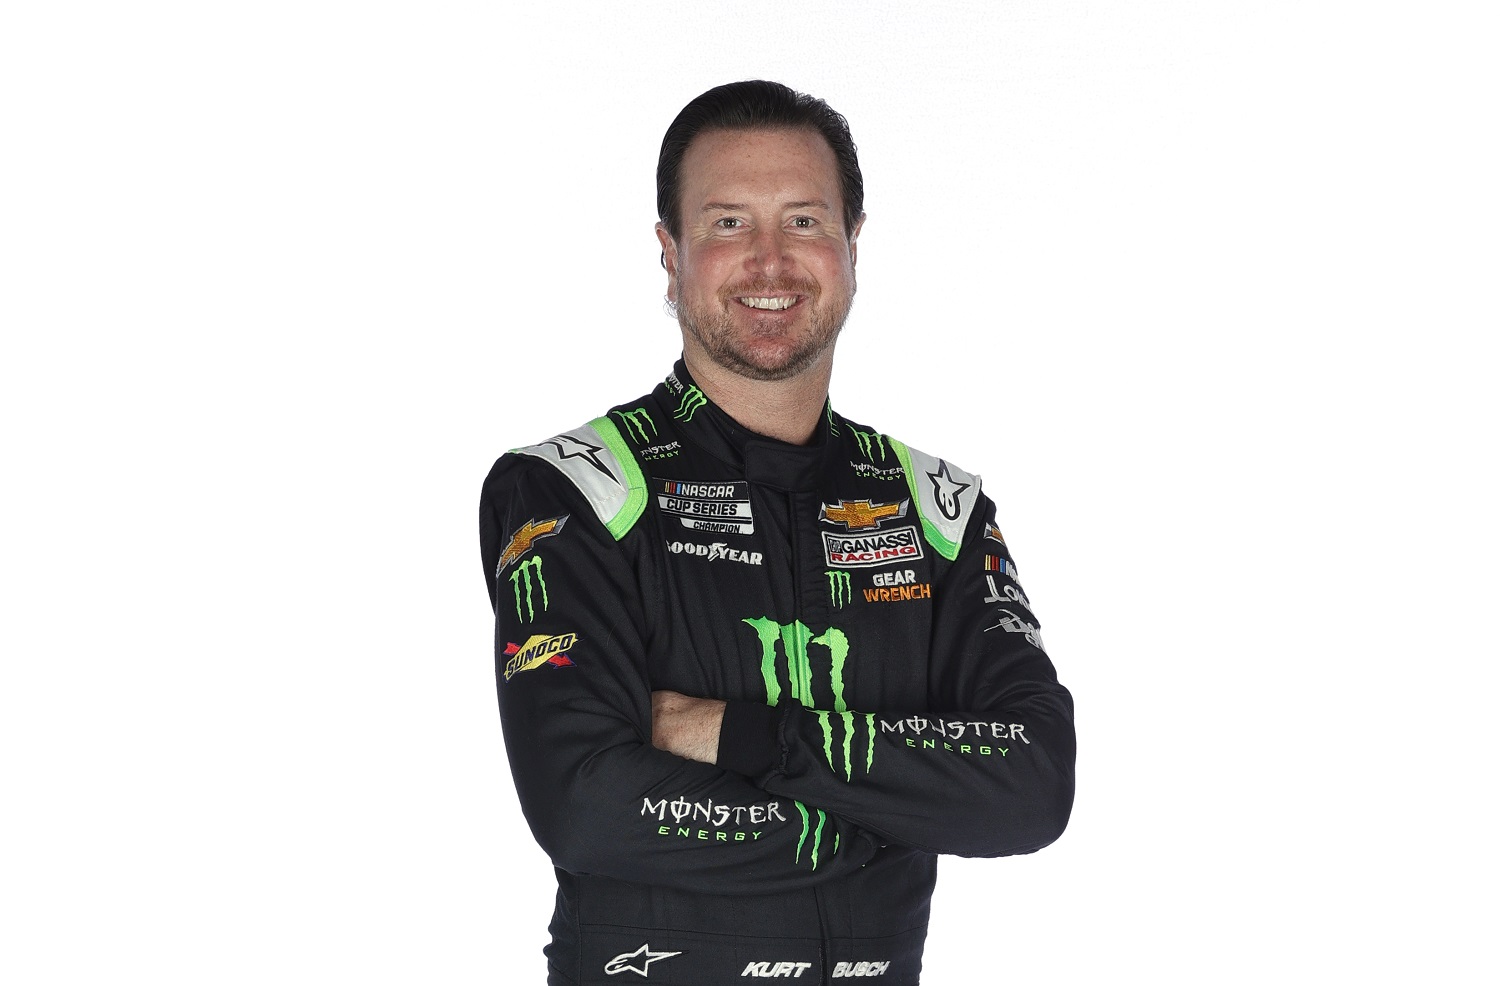 Driver Kurt Busch poses for a photo during the 2021 NASCAR Production Days at Fox Sports Studios on Jan. 20, 2021 in Charlotte, North Carolina.